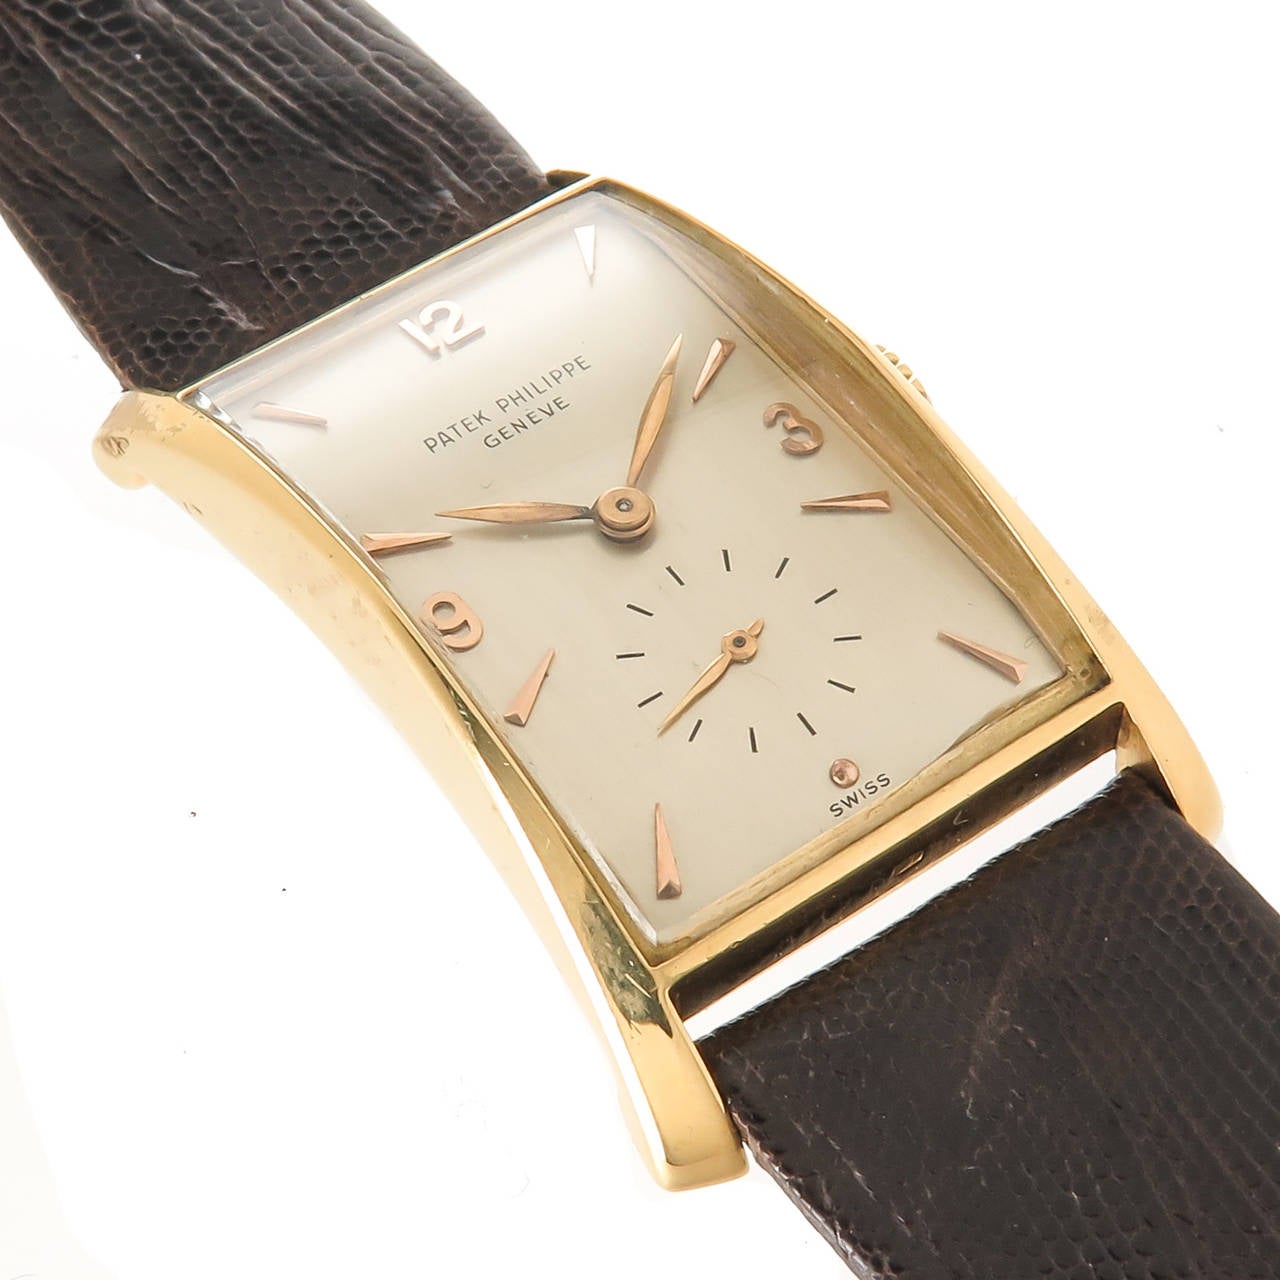 Circa 1950 Patek Philippe Reference 1593 Hour Glass Wrist Watch. Case measuring 41 X 22 M.M. 18 jewel manual wind  Caliber 9-90 Movement. Original Silvered Dial with raised gold Markers. Hirsch Lizard strap. Case and movement having correct Patek